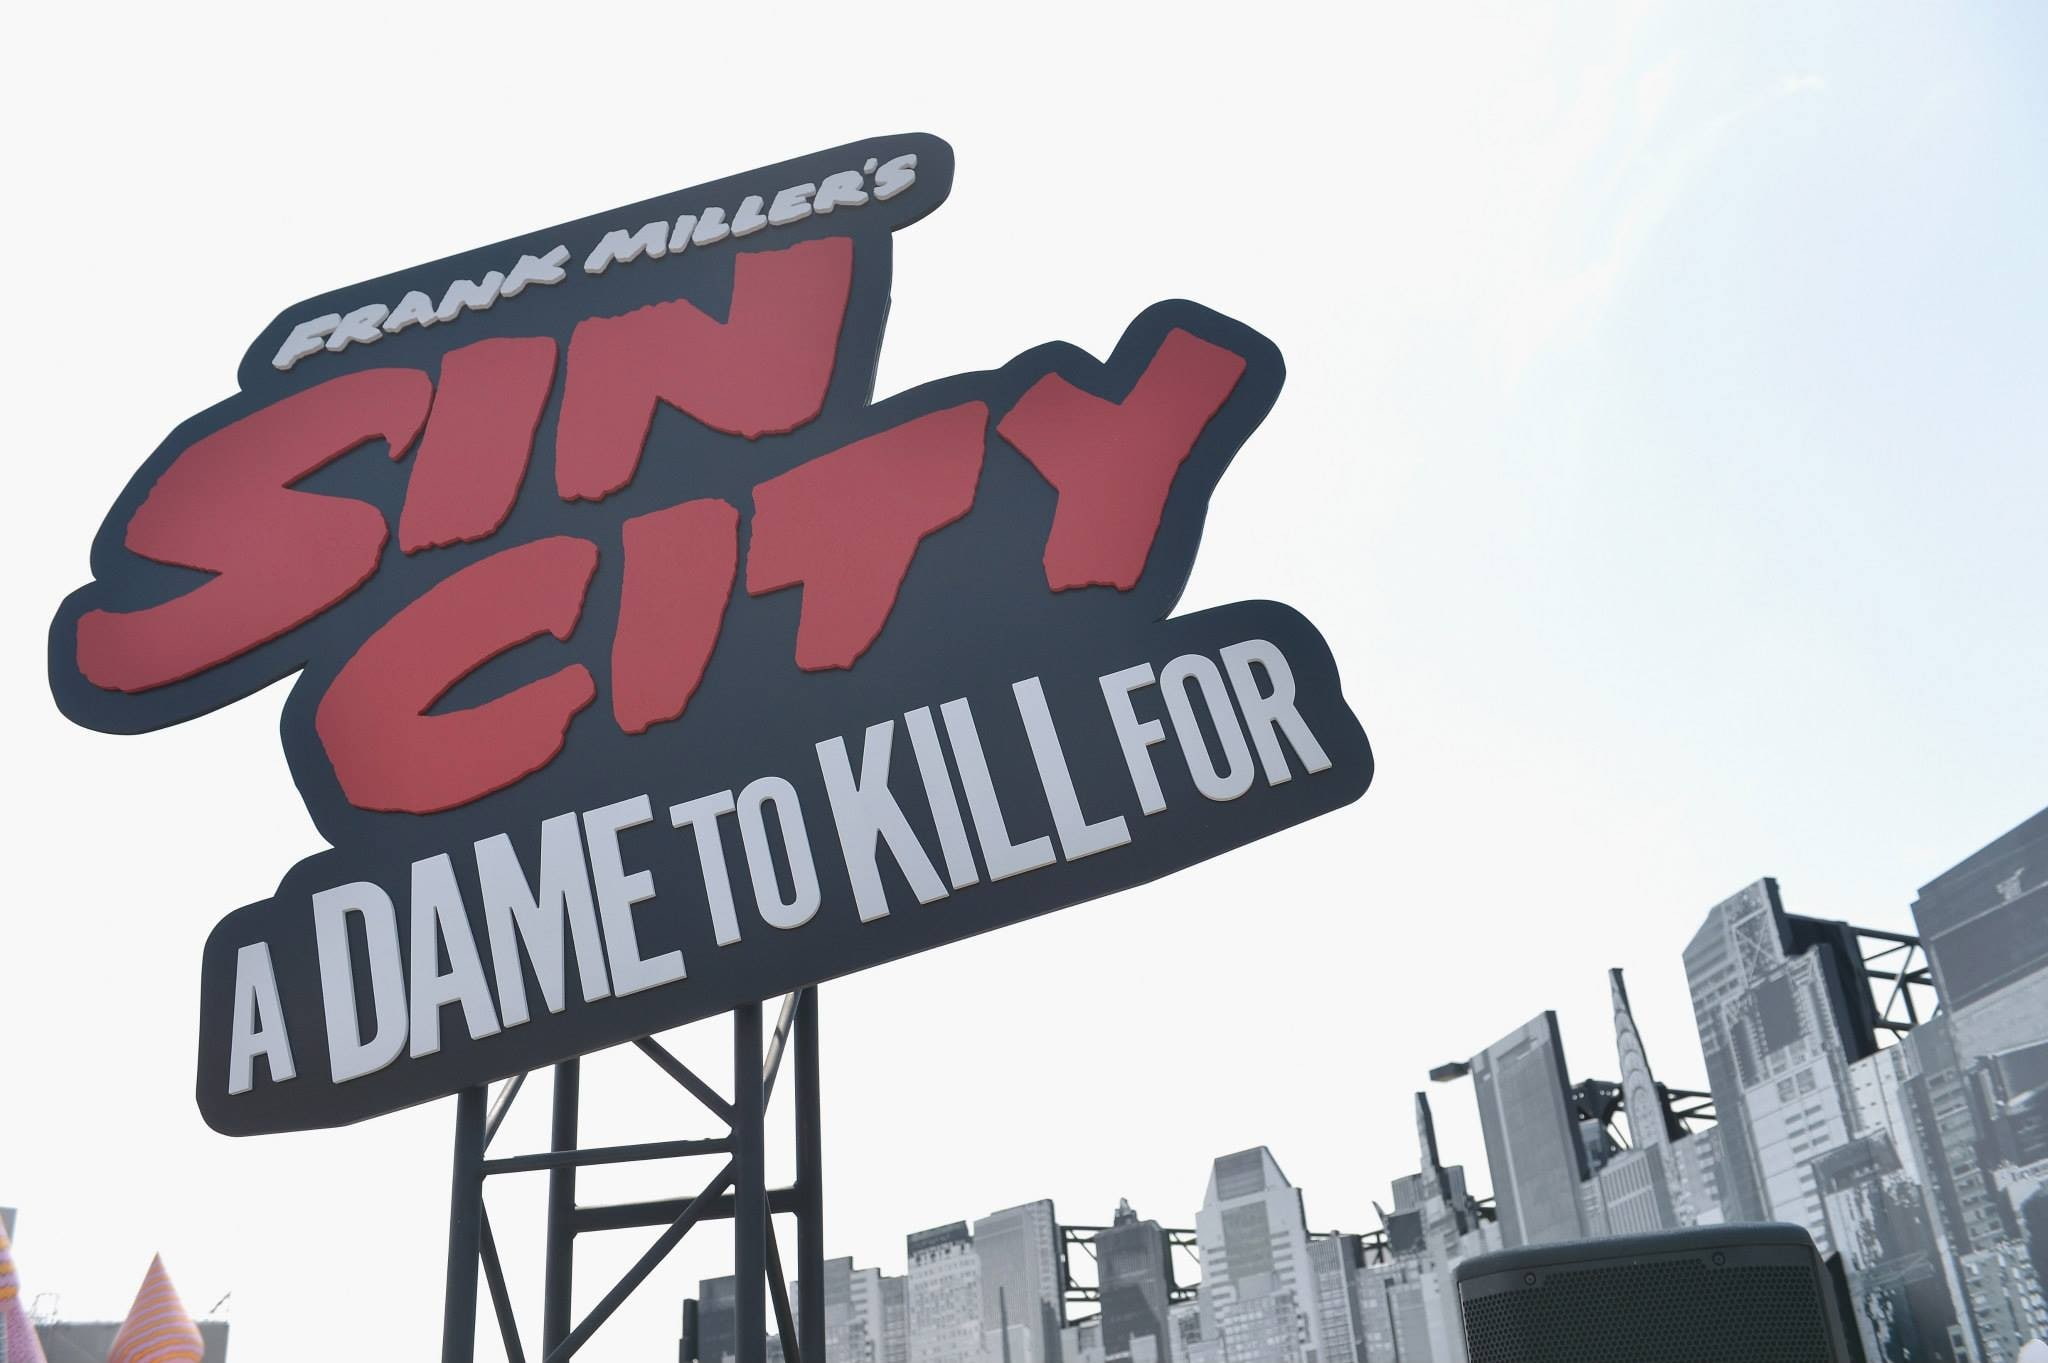 Sin City 2: A Dame to Kill For, film stills, movies, text, building exterior